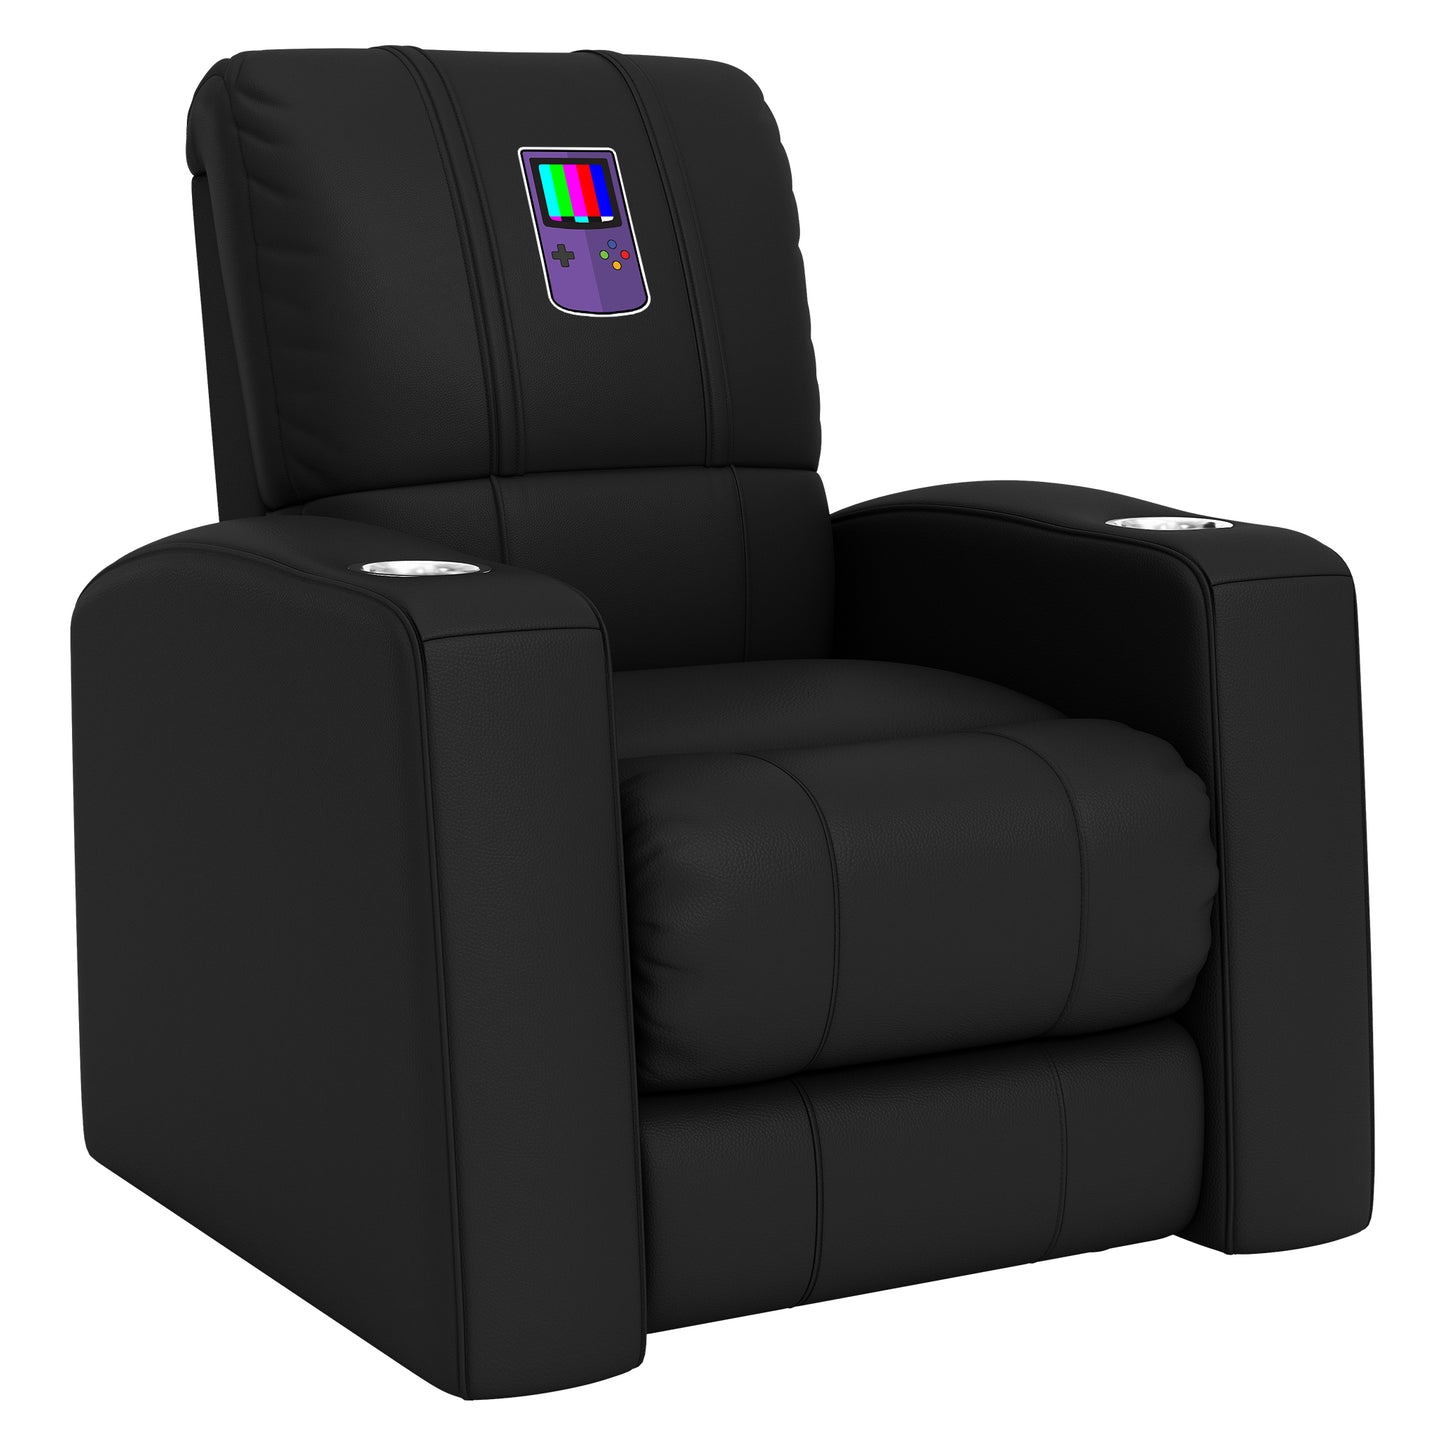 Relax Home Theater Recliner with Handheld System Logo